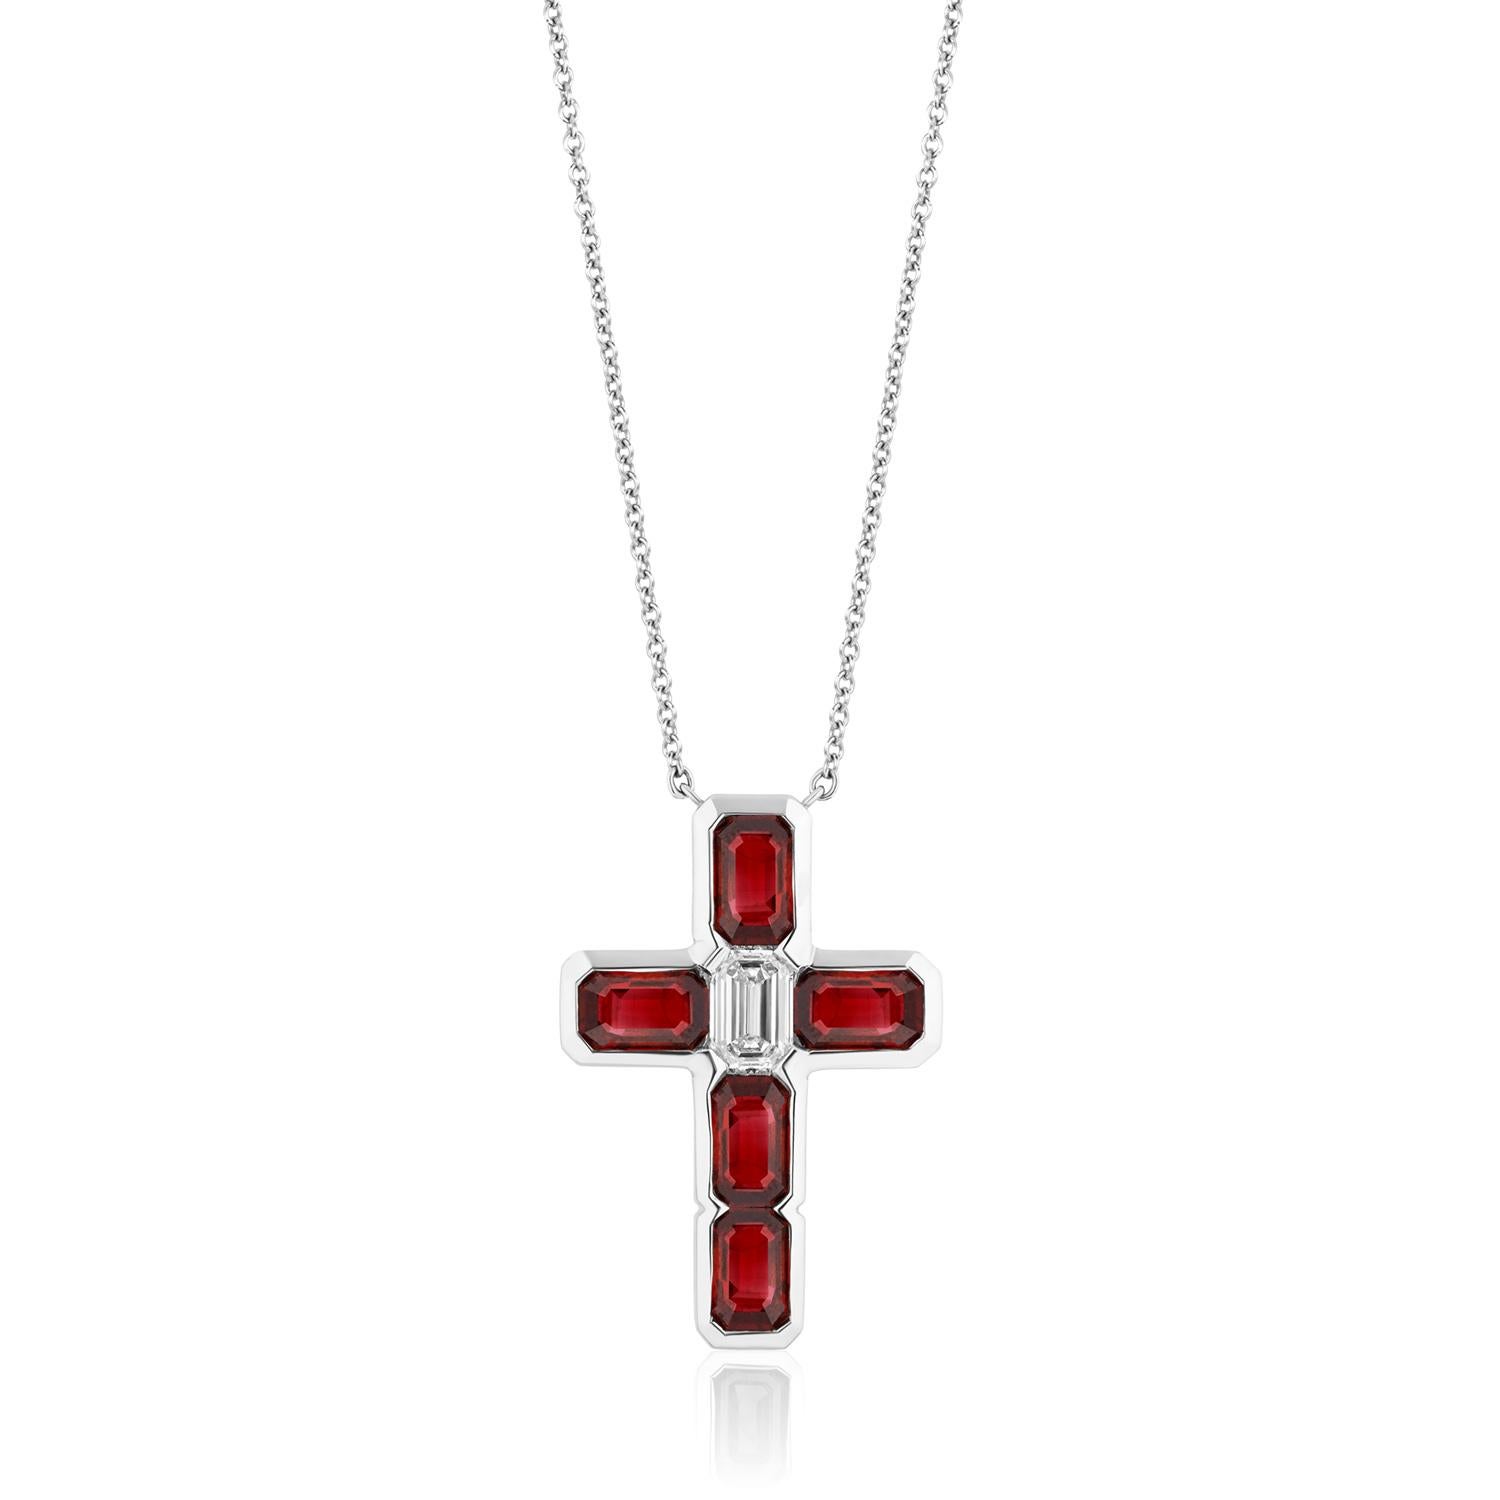 Contemporary 3.68 Carat Emerald Cut Ruby and Diamond Cross For Sale